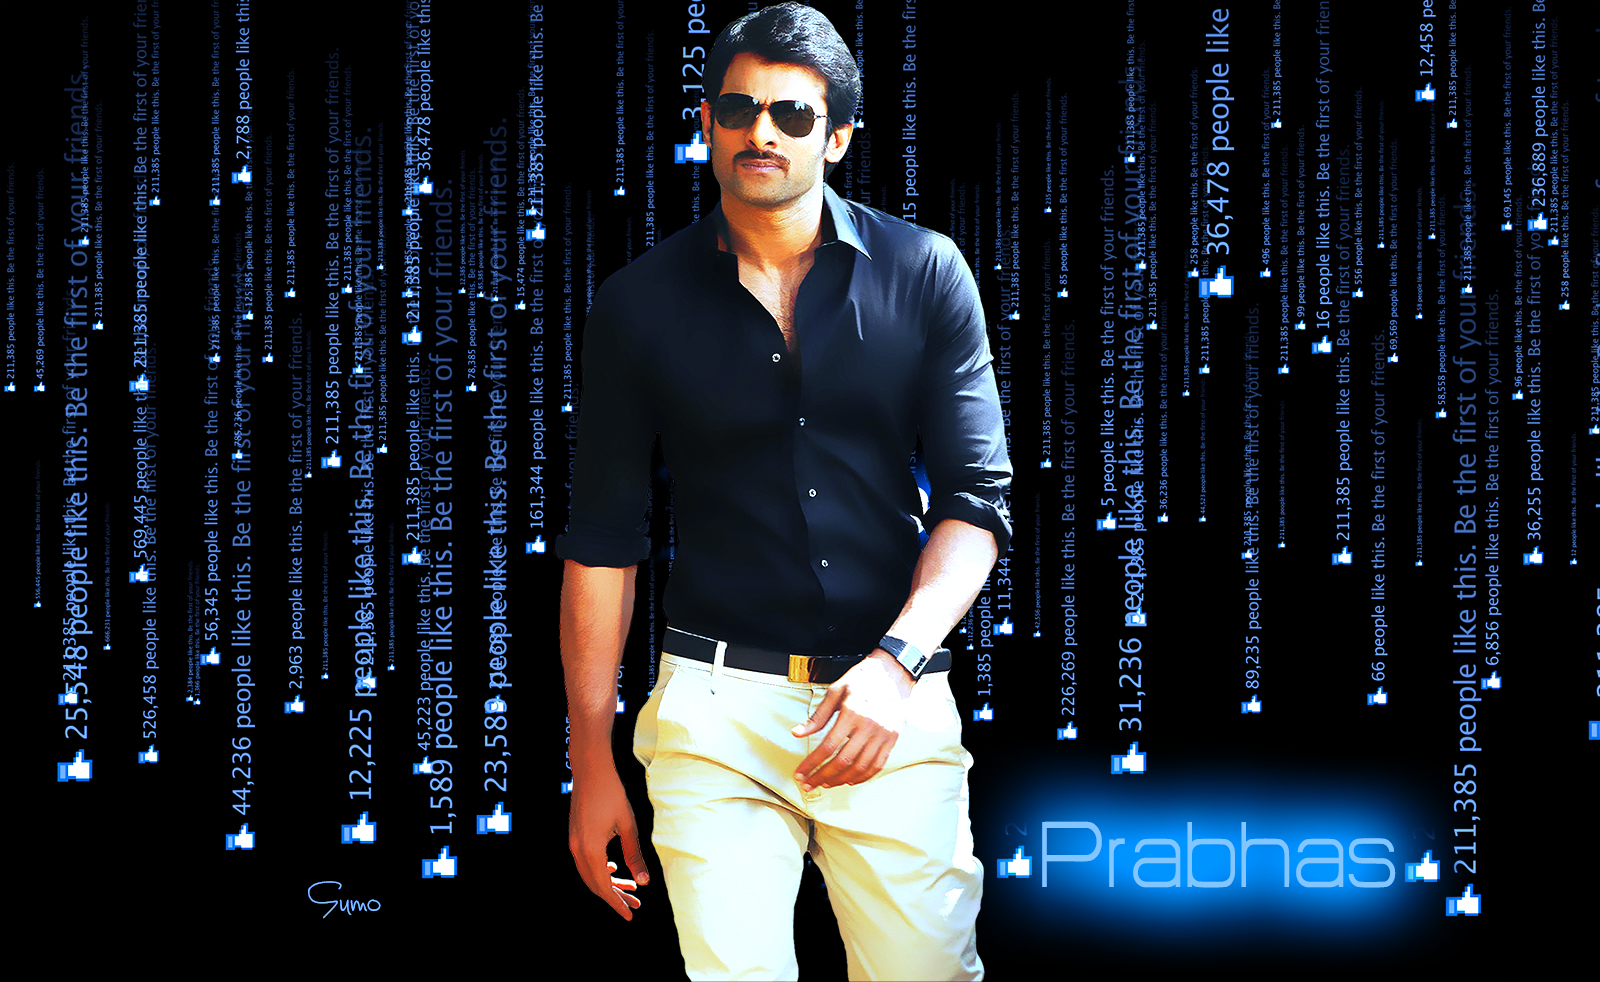 Unlimited Likes for Our Hero Prabhas by Sumanth0019 on DeviantArt